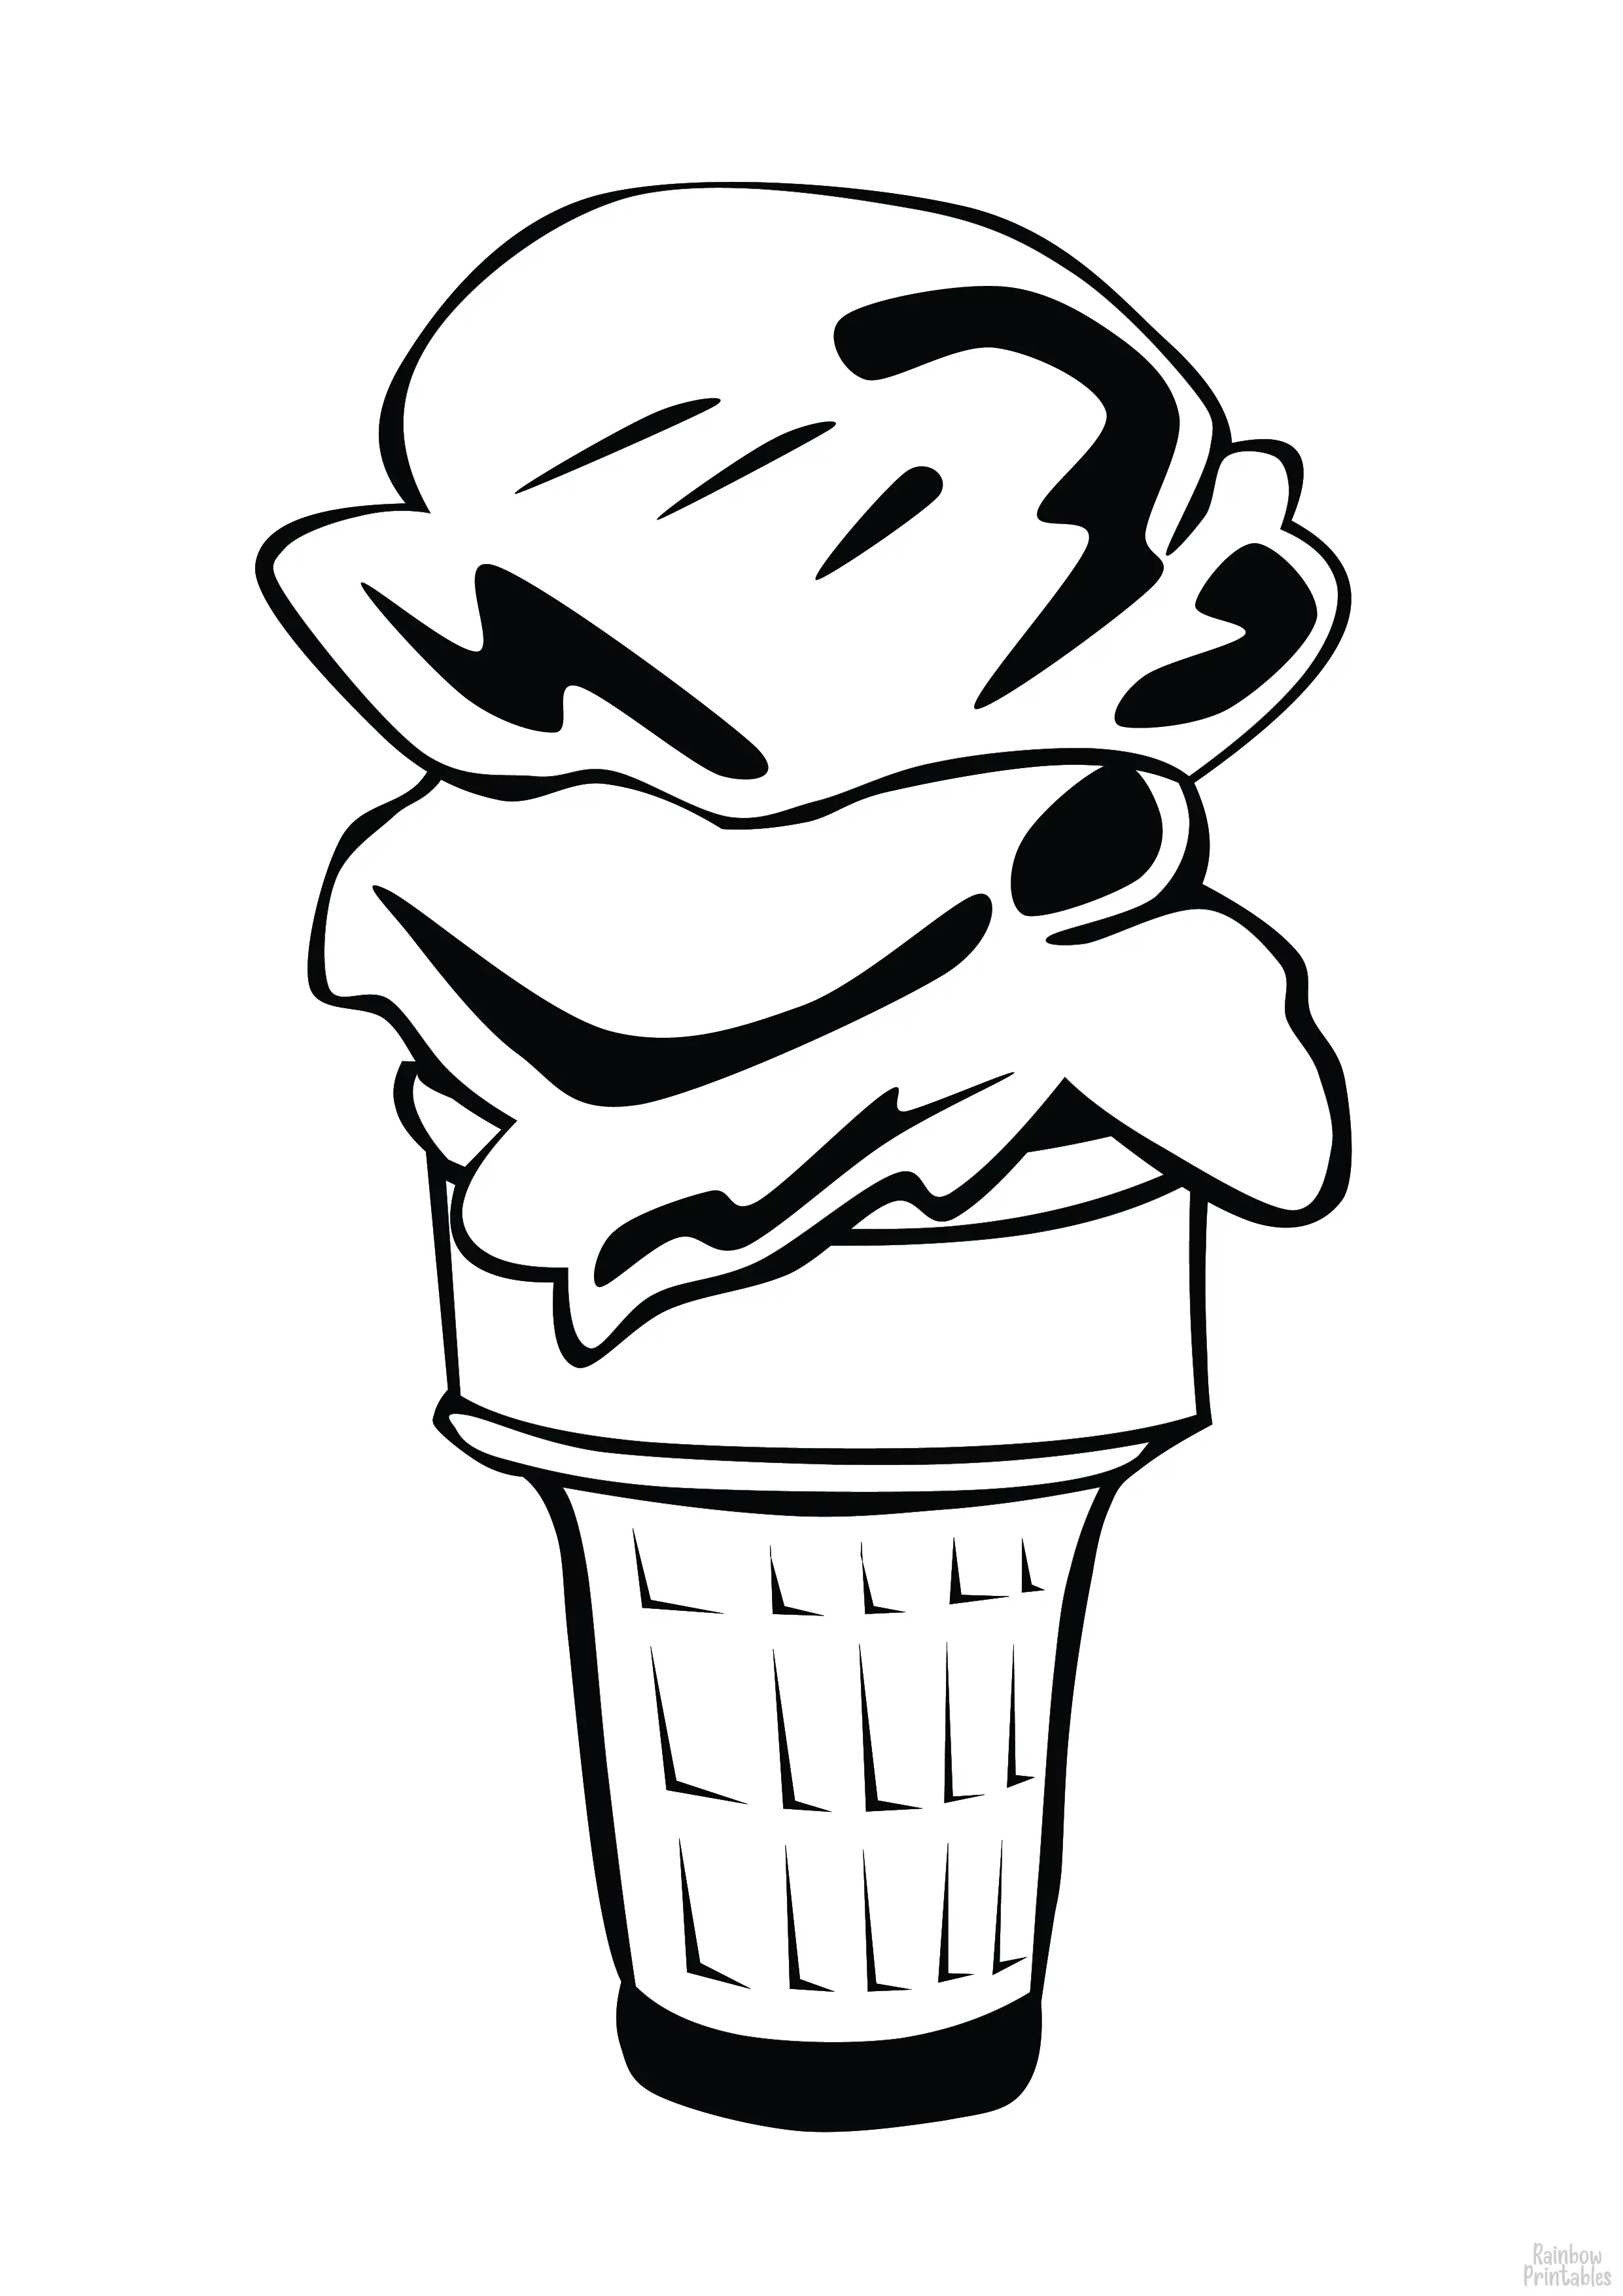 Ice Cream Cone Food Clipart Coloring Pages Line Art Drawings for Kids-01